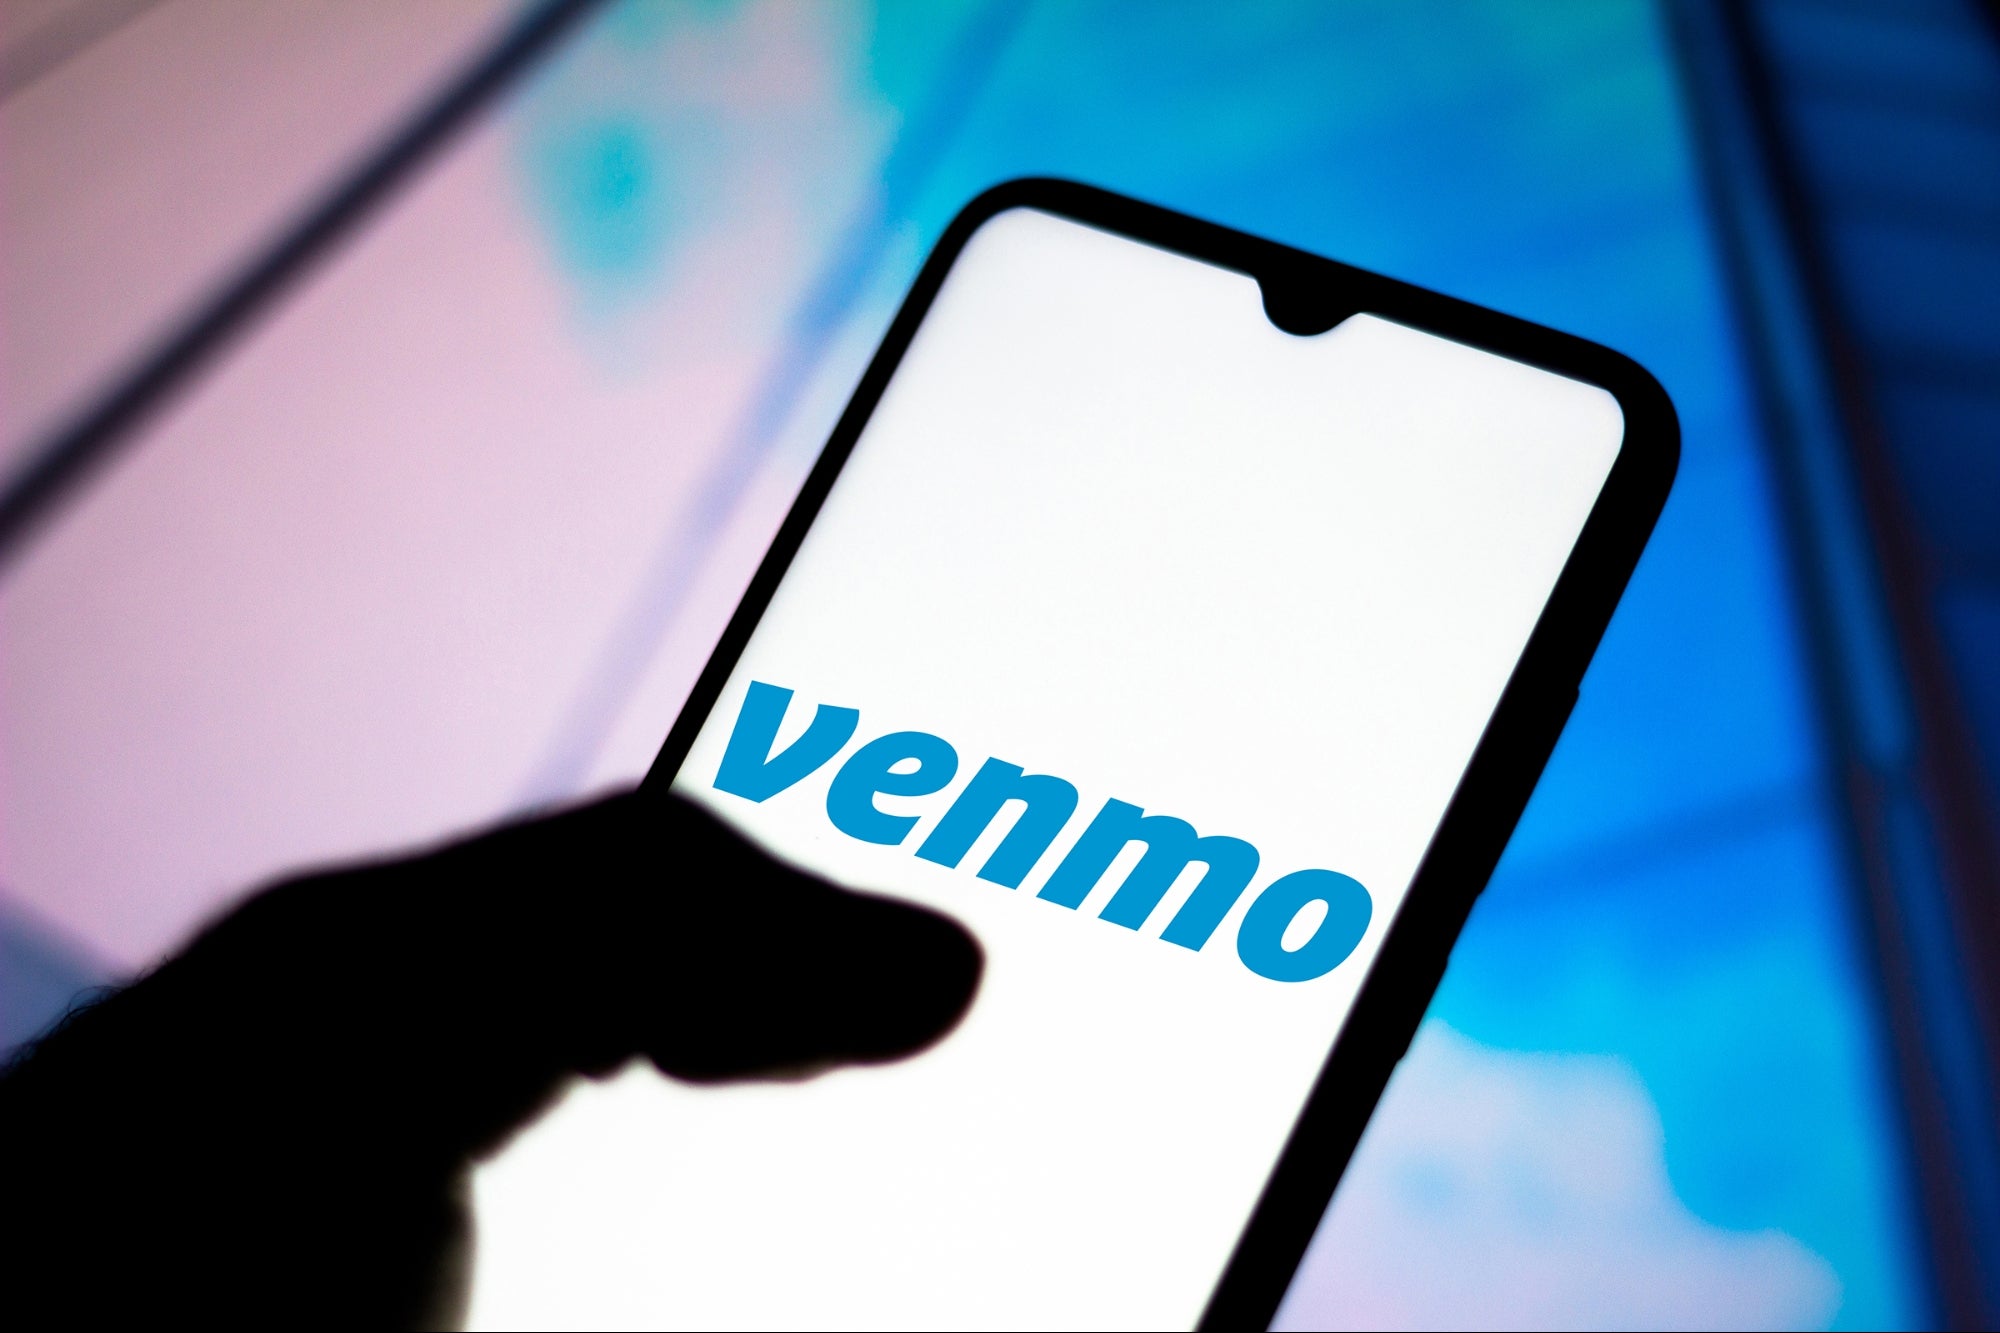 Venmo – Share Payments: How to transfer and receive money